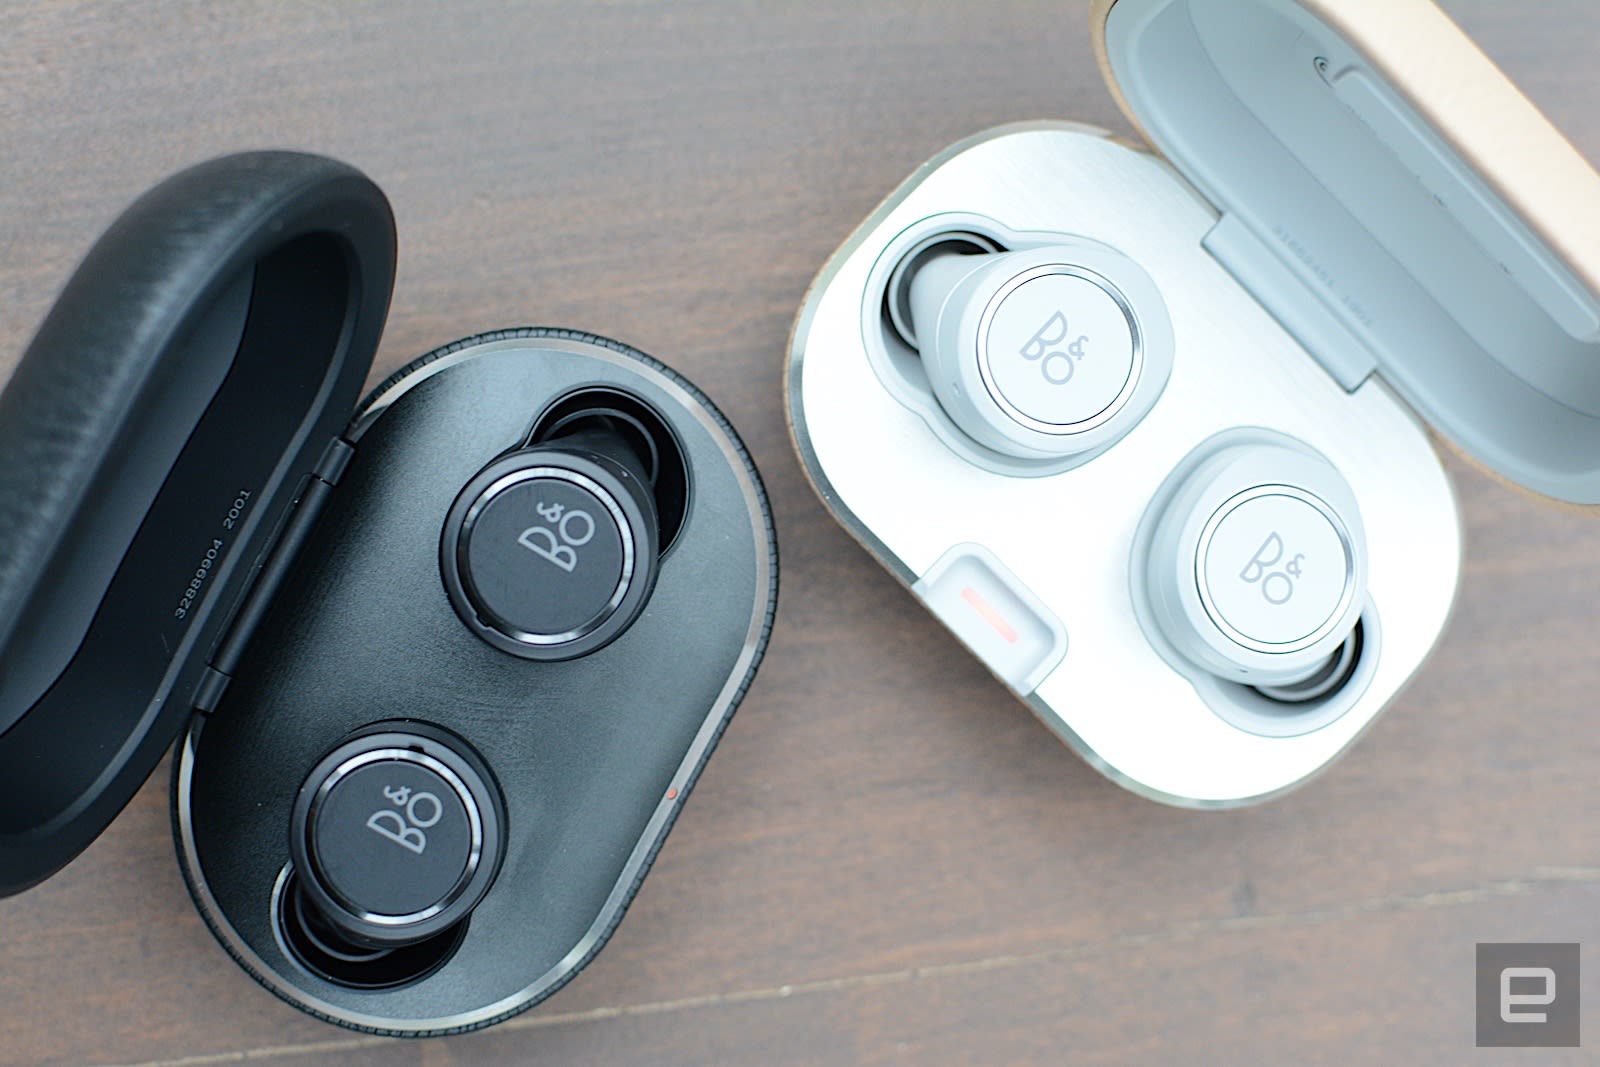 Bang & Olufsen Beoplay E8 true wireless earbuds review | Engadget